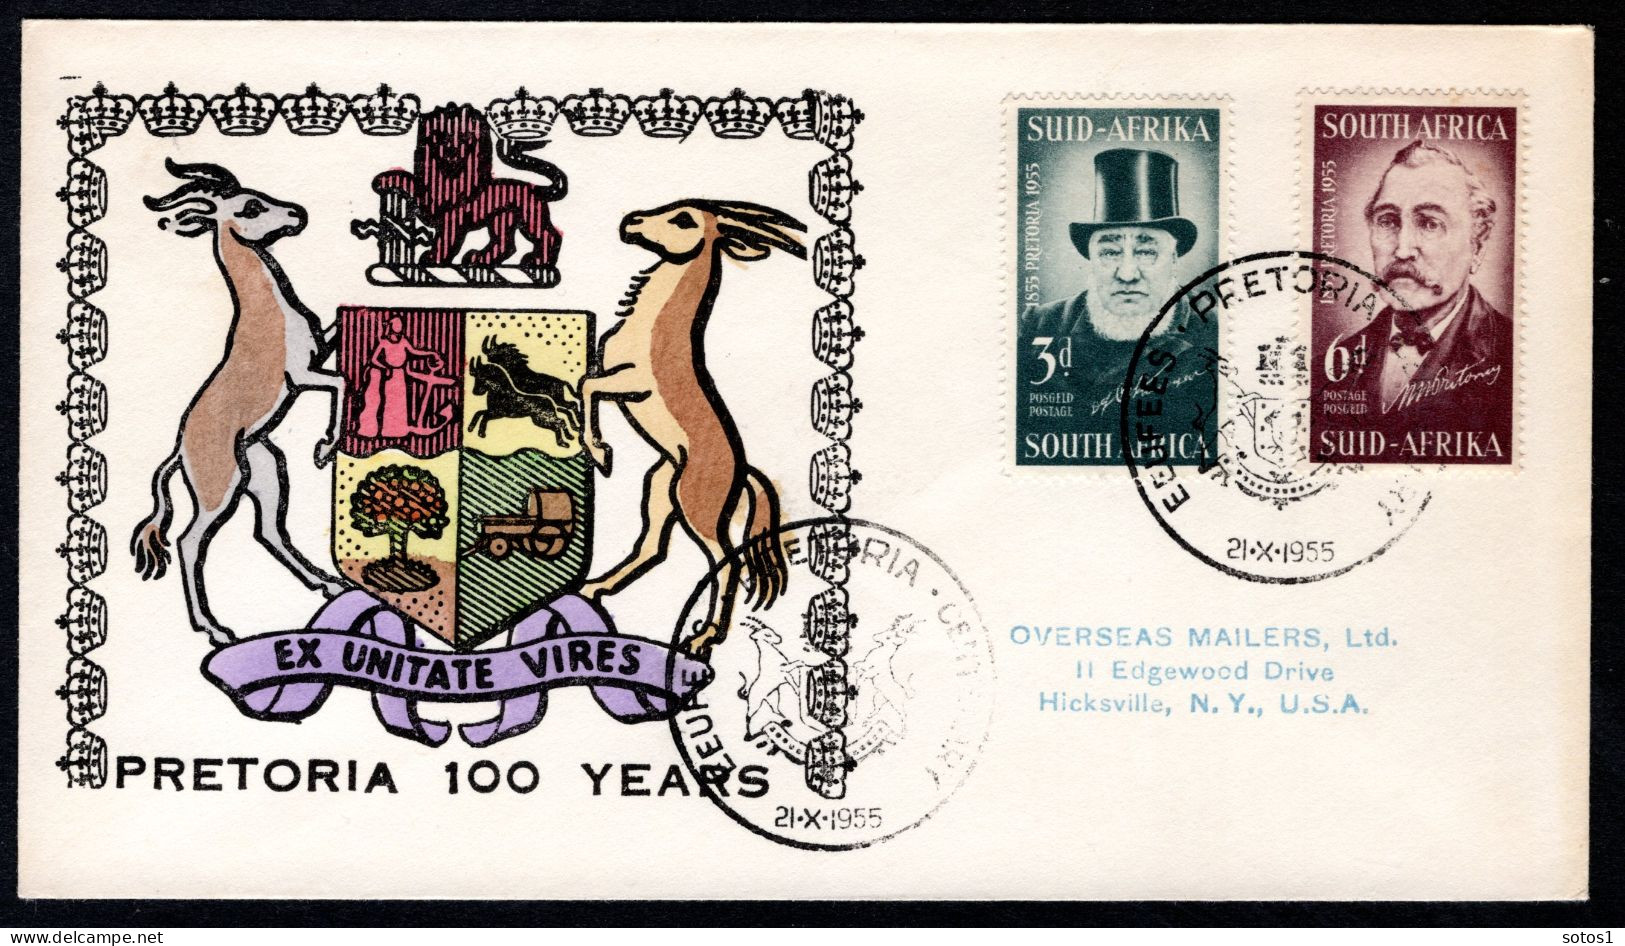 SOUTH AFRICA Yt. 215/216 FDC 100 YEARS PRETORIA 1955 - FDC